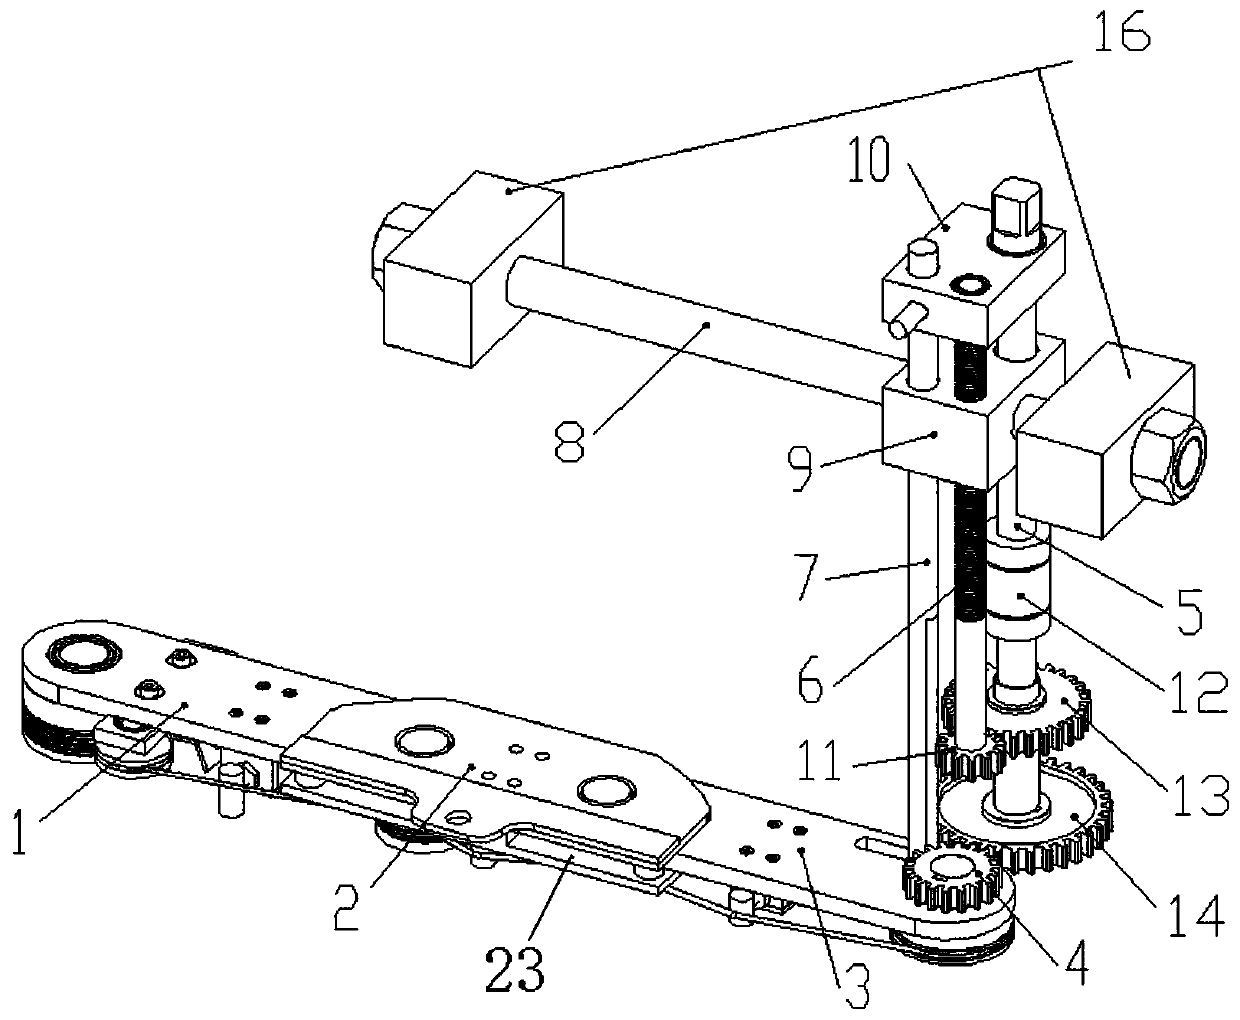 Bolt assembling and dismantling mechanical wrench for transmitting large torque in long and narrow space